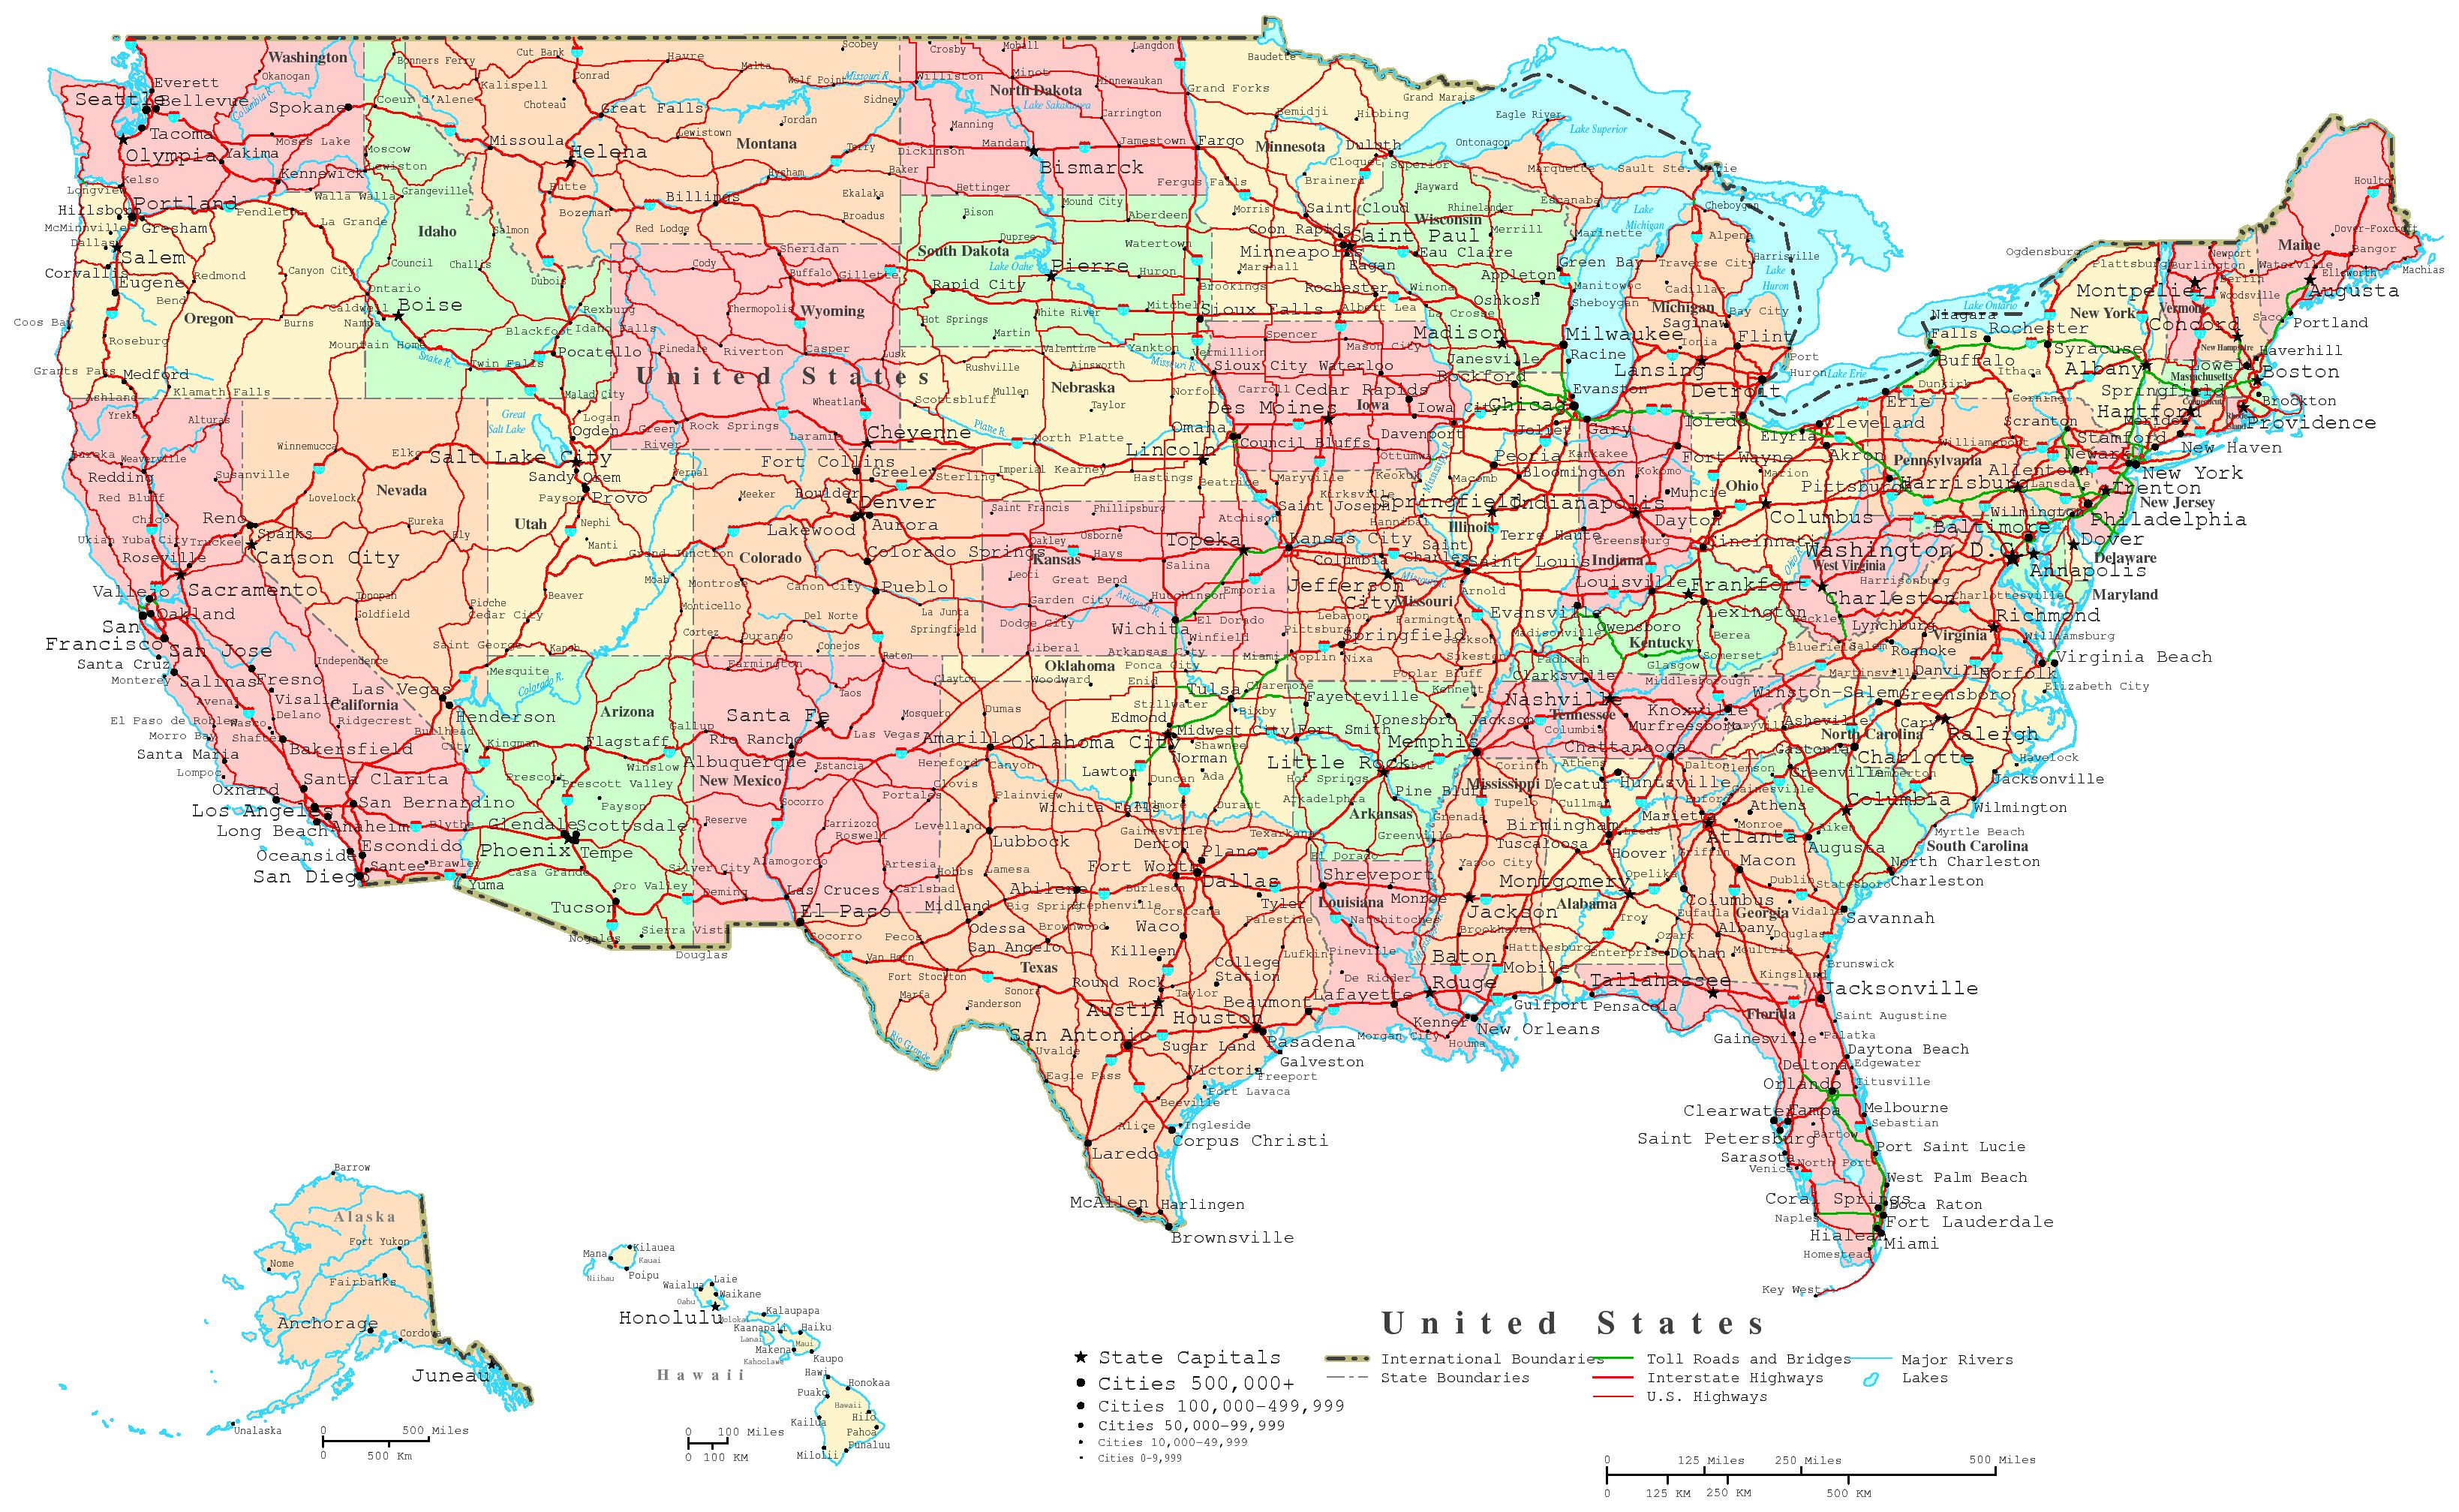 Jpg Freeuse Download Map Of United States With Interstates - Rr - Free Printable Road Maps Of The United States